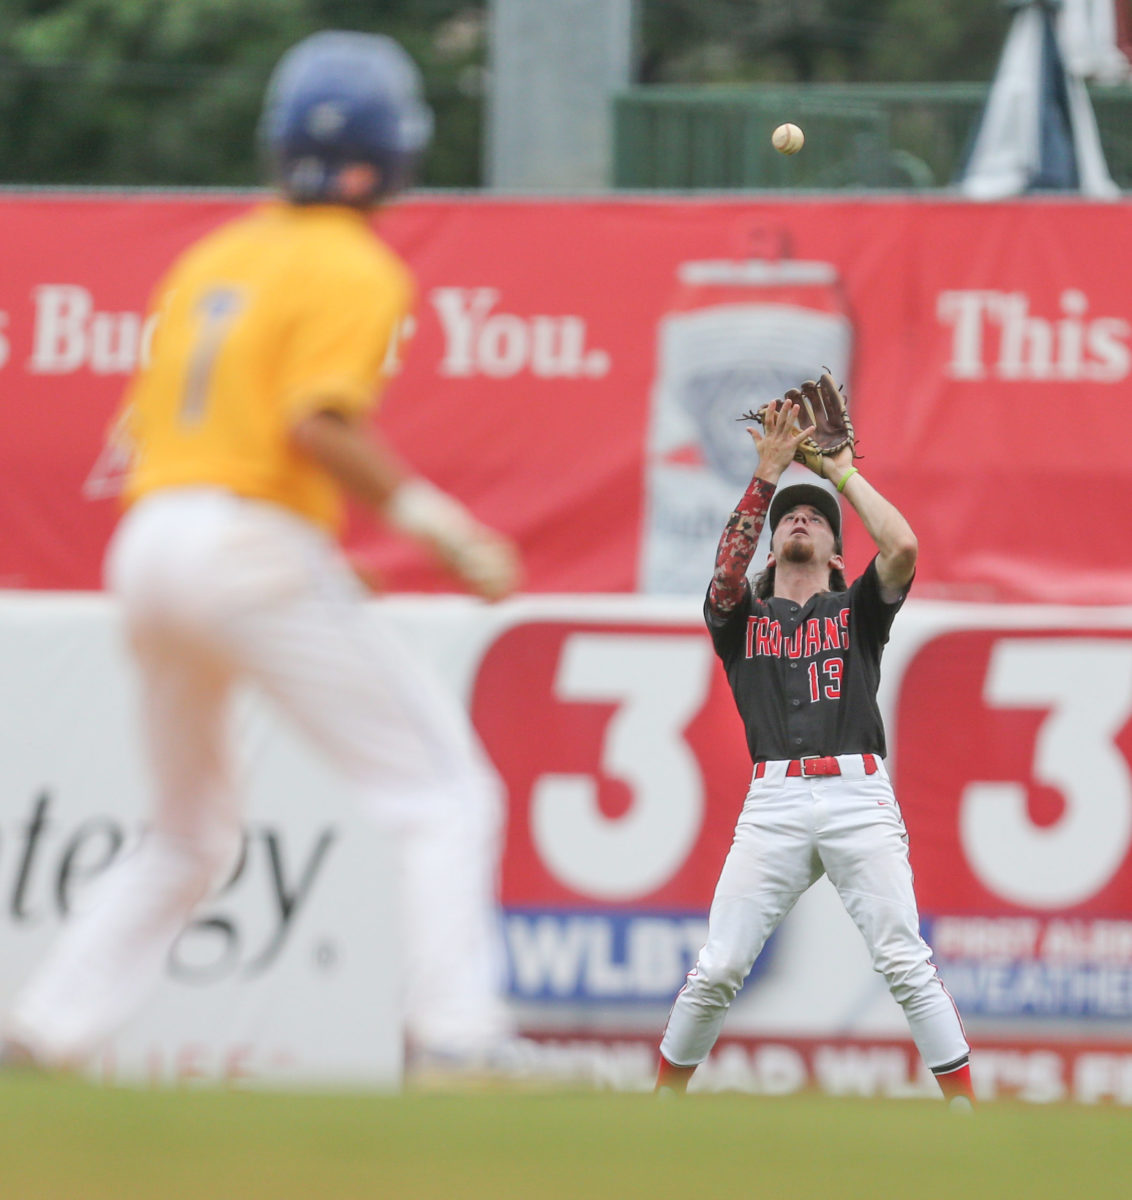 Magee's Matthew Russell (13) catches a fly ball in right field. Booneville and Magee played in game 1 of the MHSAA Class 3A Baseball Championship on Tuesday, June 1, 2021 at Trustmark Park. Photo by Keith Warren